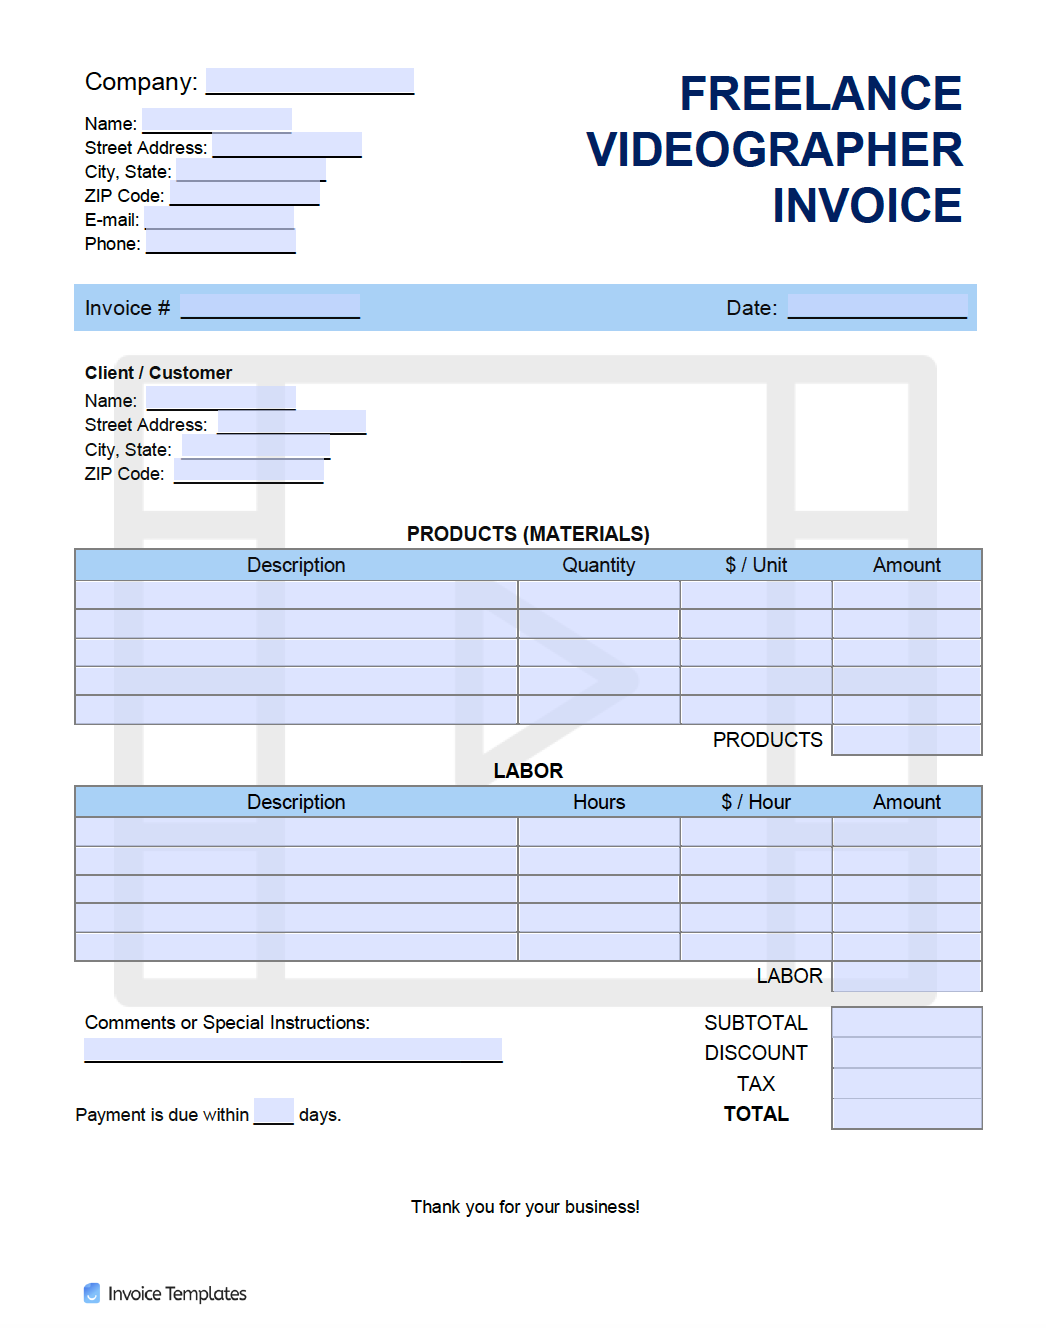 Free Freelance Videographer Invoice Template  PDF  WORD  EXCEL In Film Invoice Template